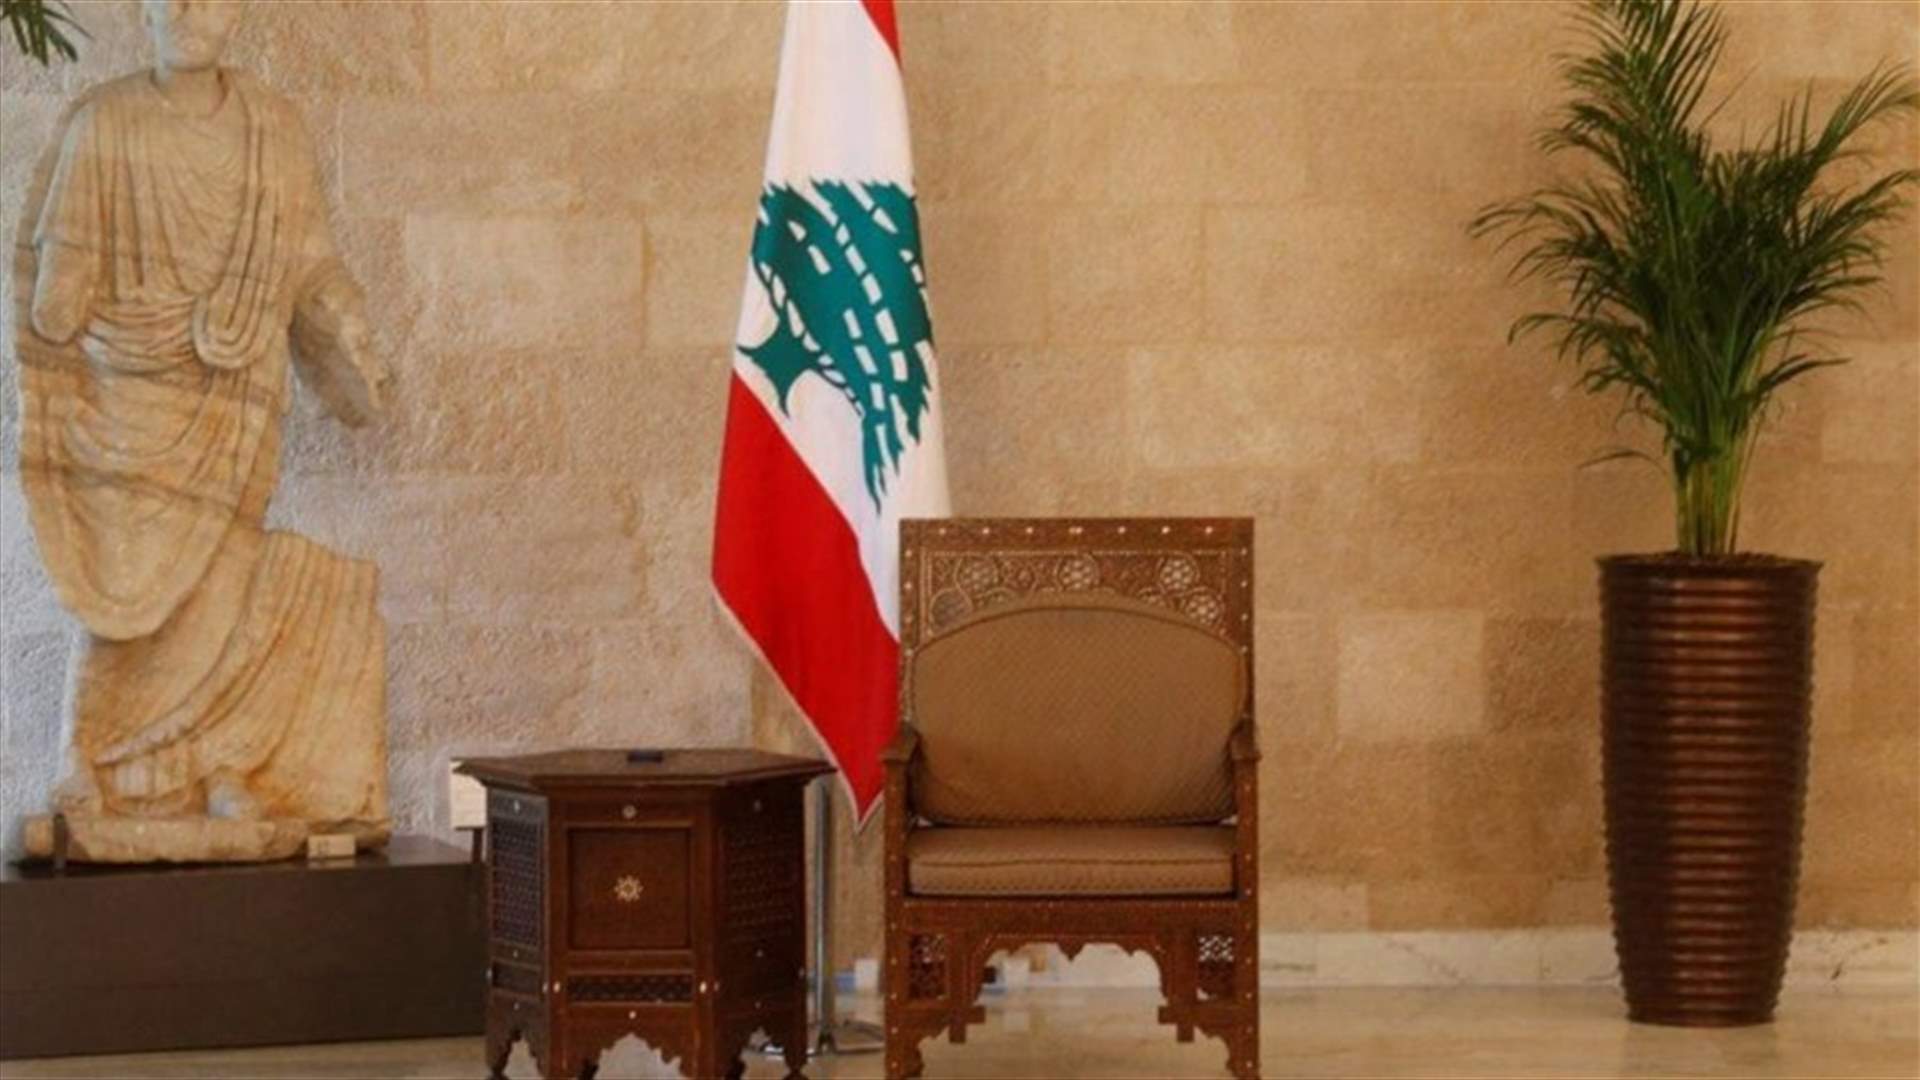 ALPI-PAC Responds to U.S. State Department’s Statement on Lebanon’s Presidential Vacancy